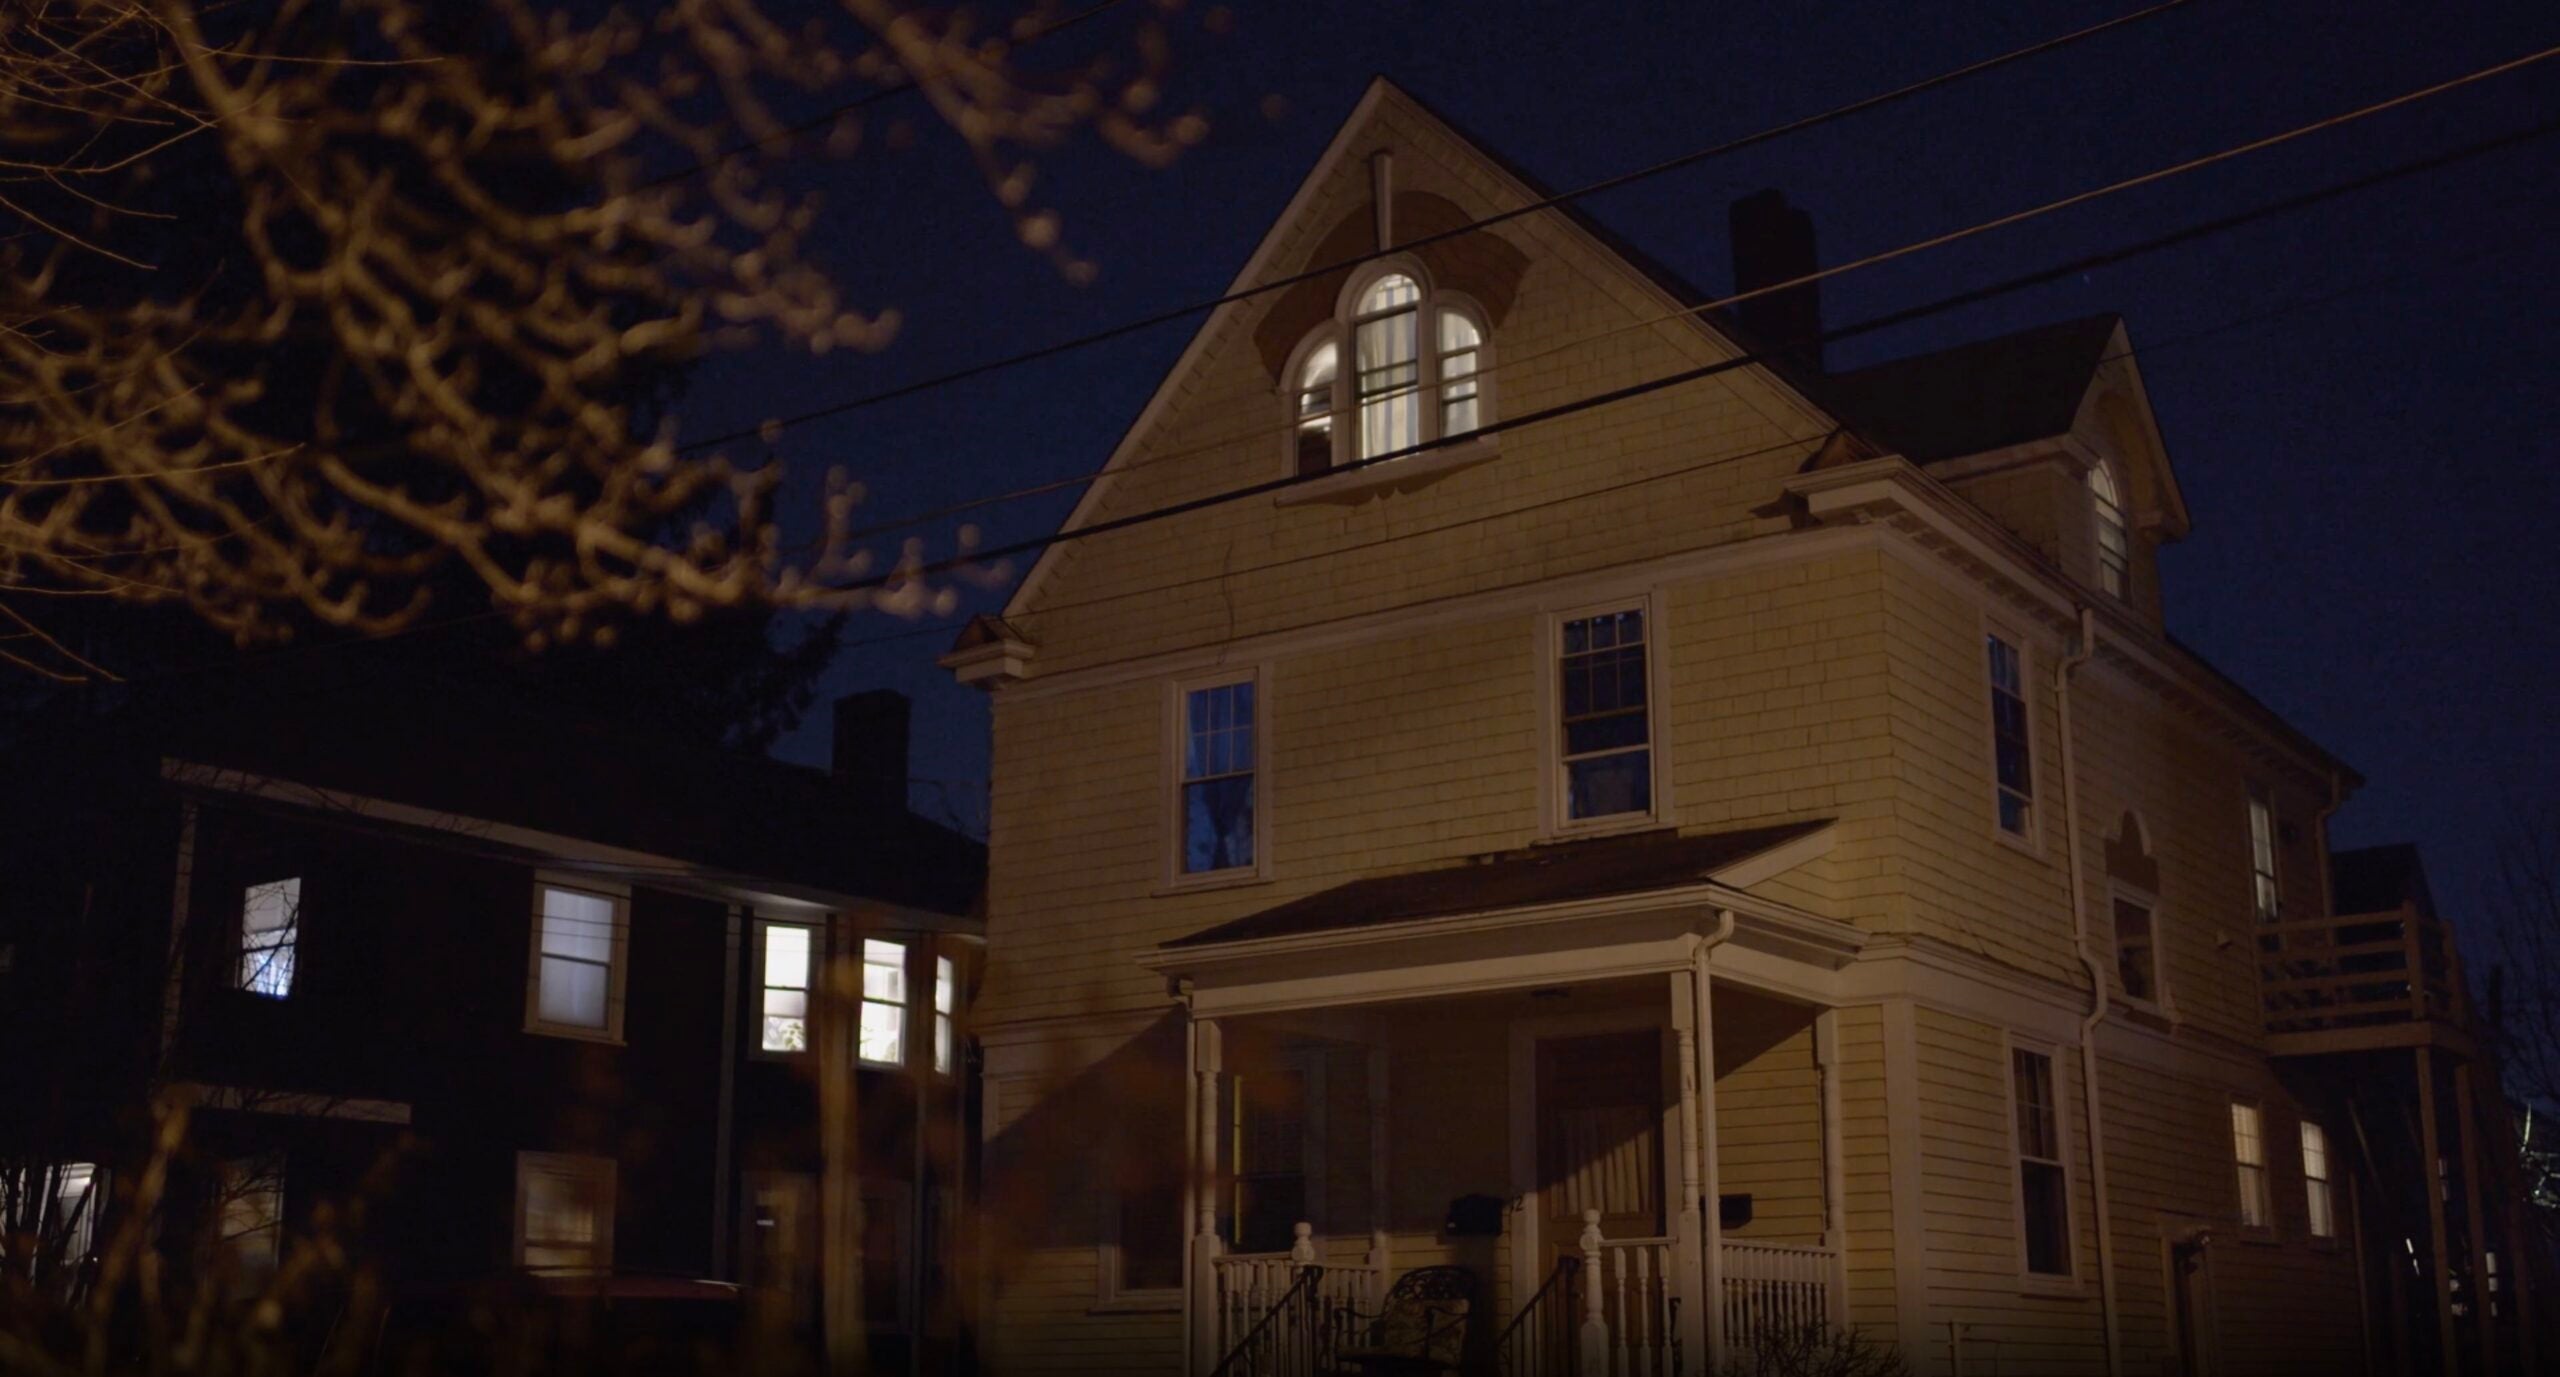 A still from "The Murders Before the Marathon" showing the apartment of Brendan Mess where the 2011 Waltham murders took place.